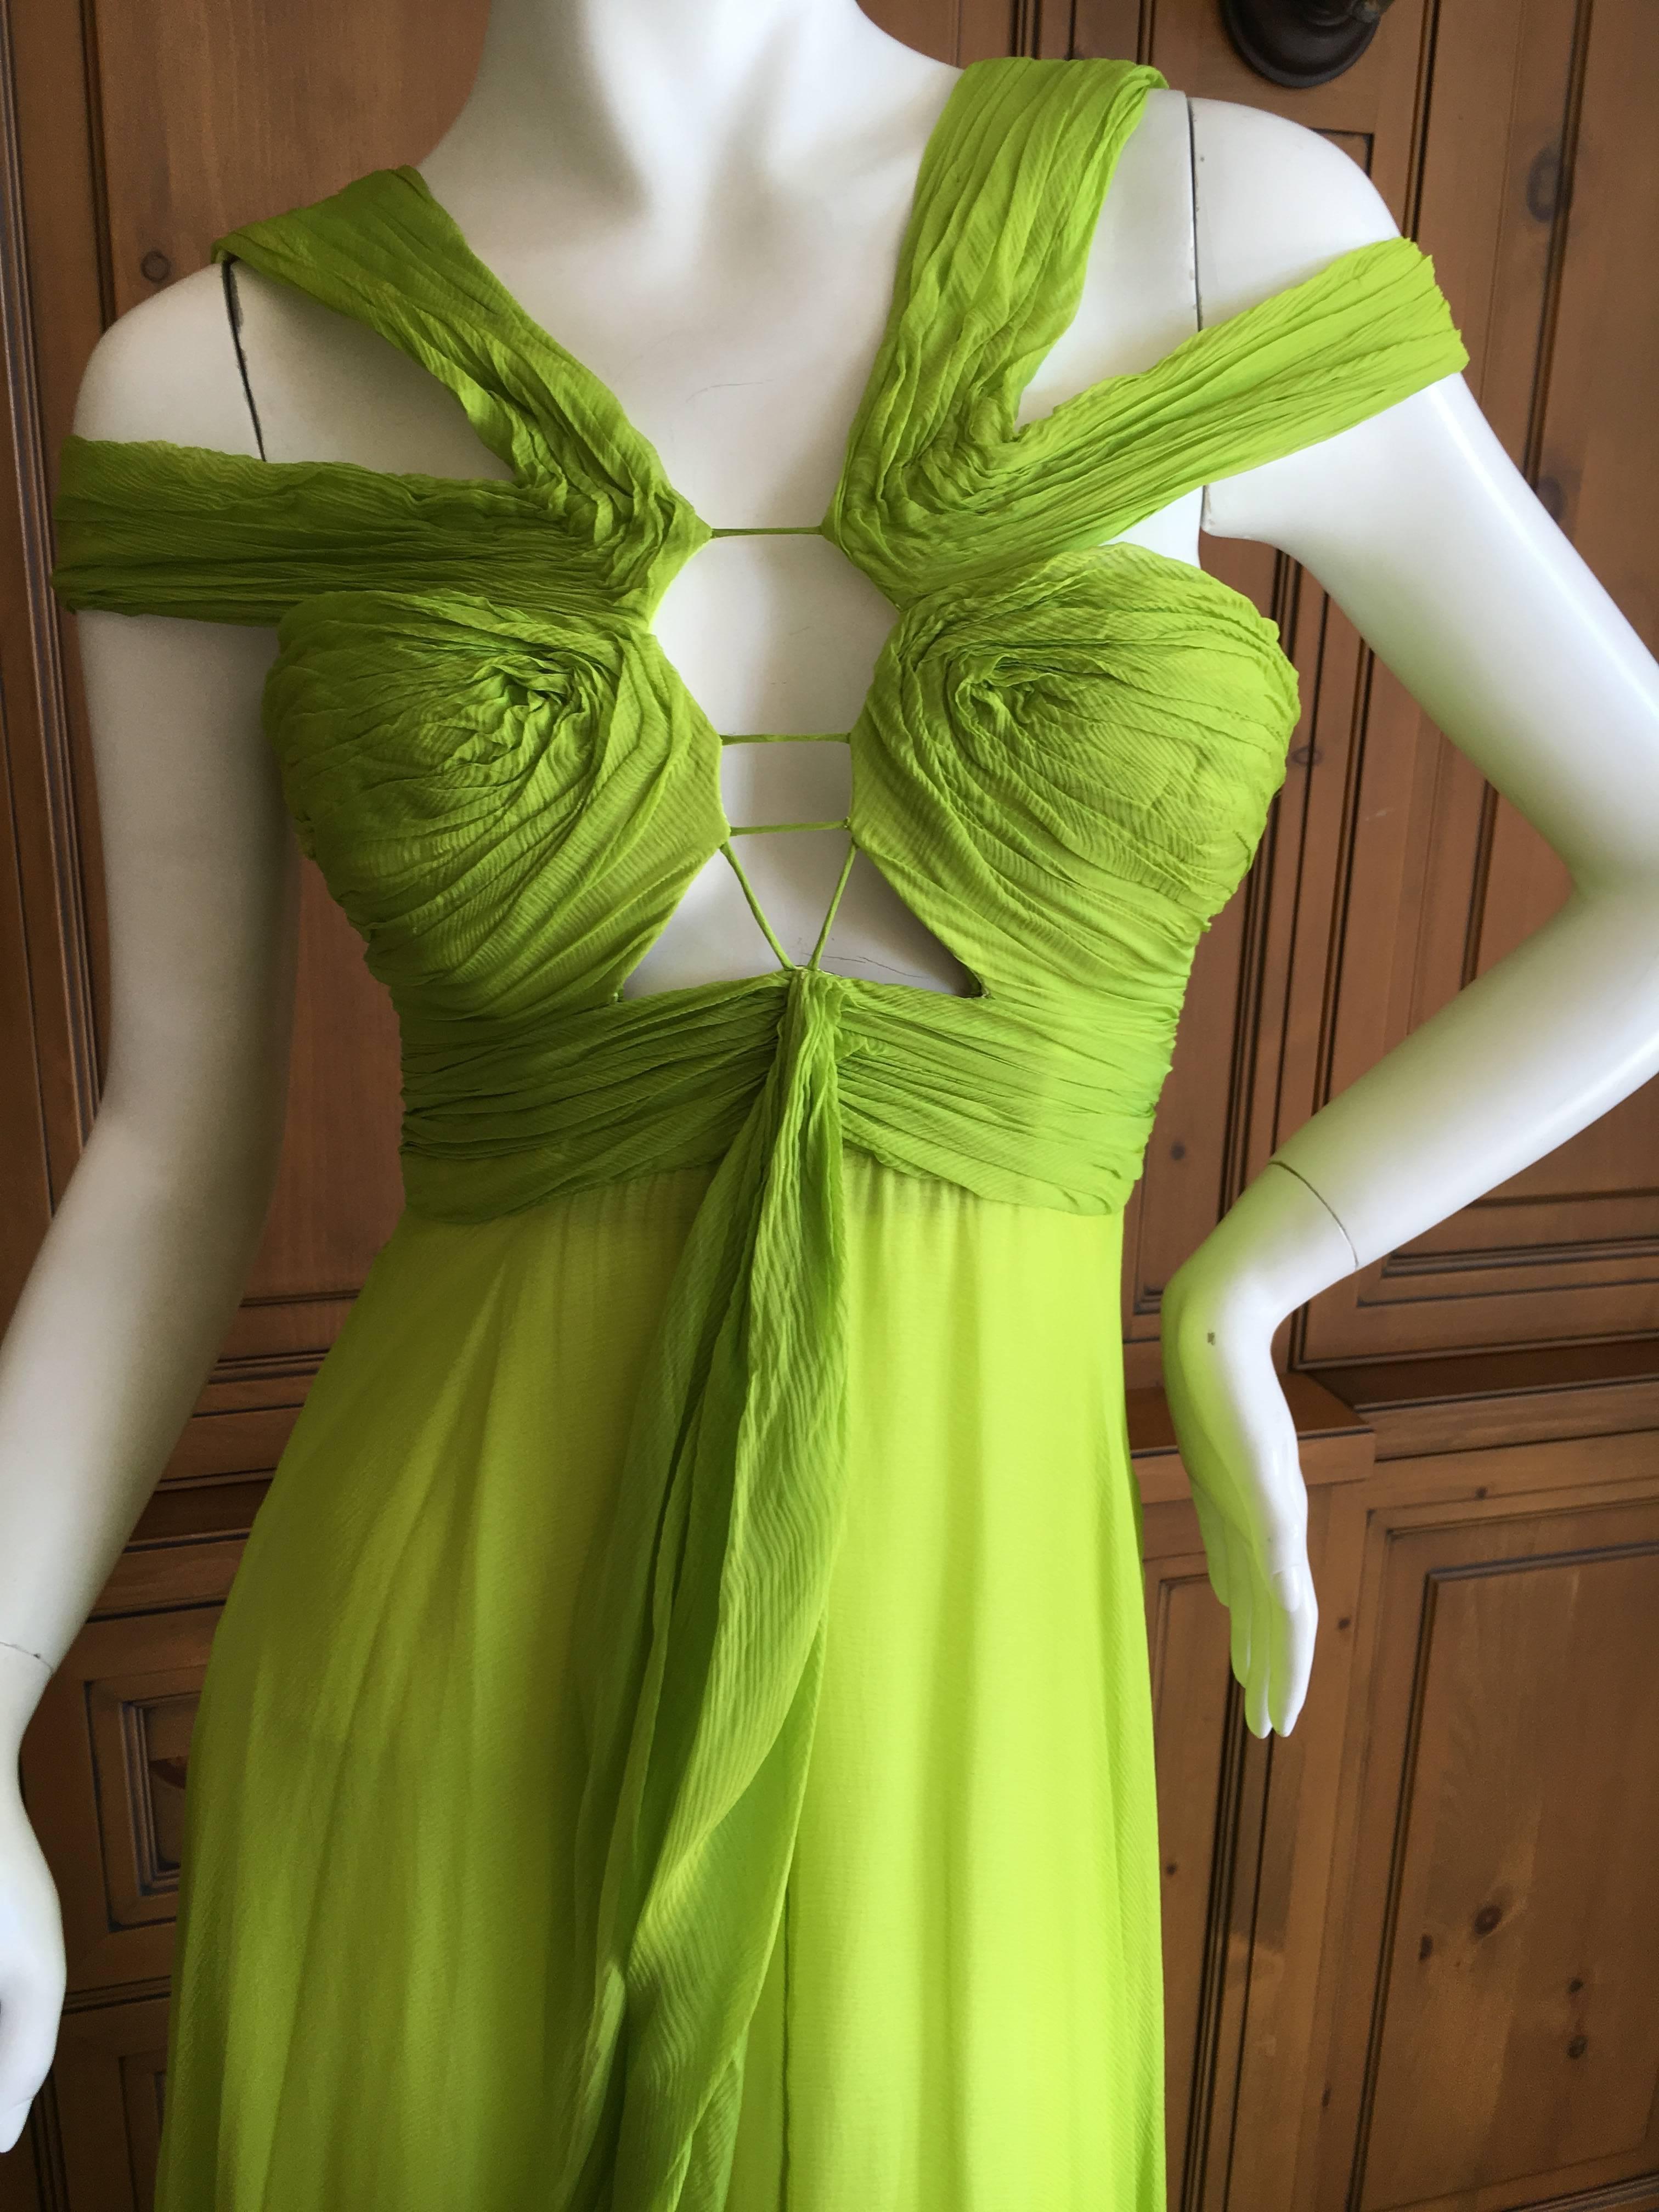 Ungaro by Peter Dundas Neon Green Silk Chiffon Evening Dress In Excellent Condition For Sale In Cloverdale, CA